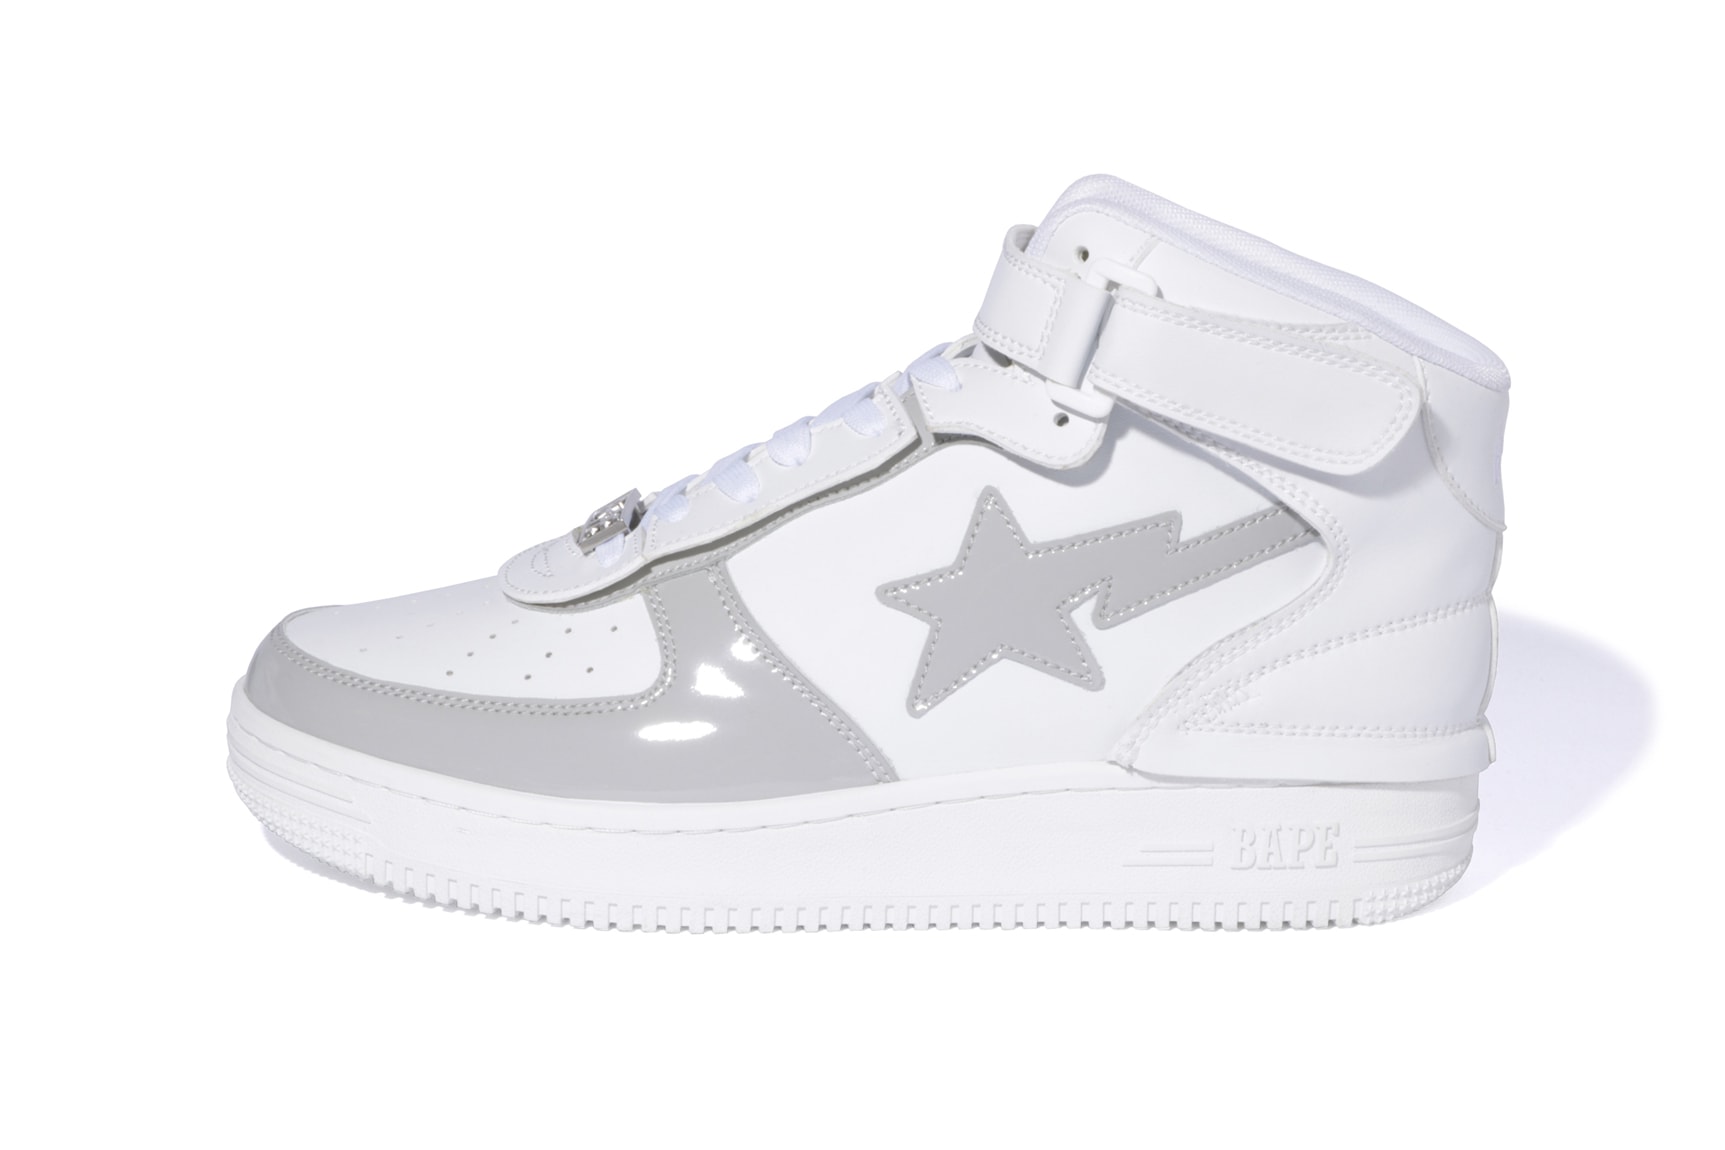 BAPE STA Mids for FW19 Release black white grey a bathing ape sneakers sta motif silver dubraes